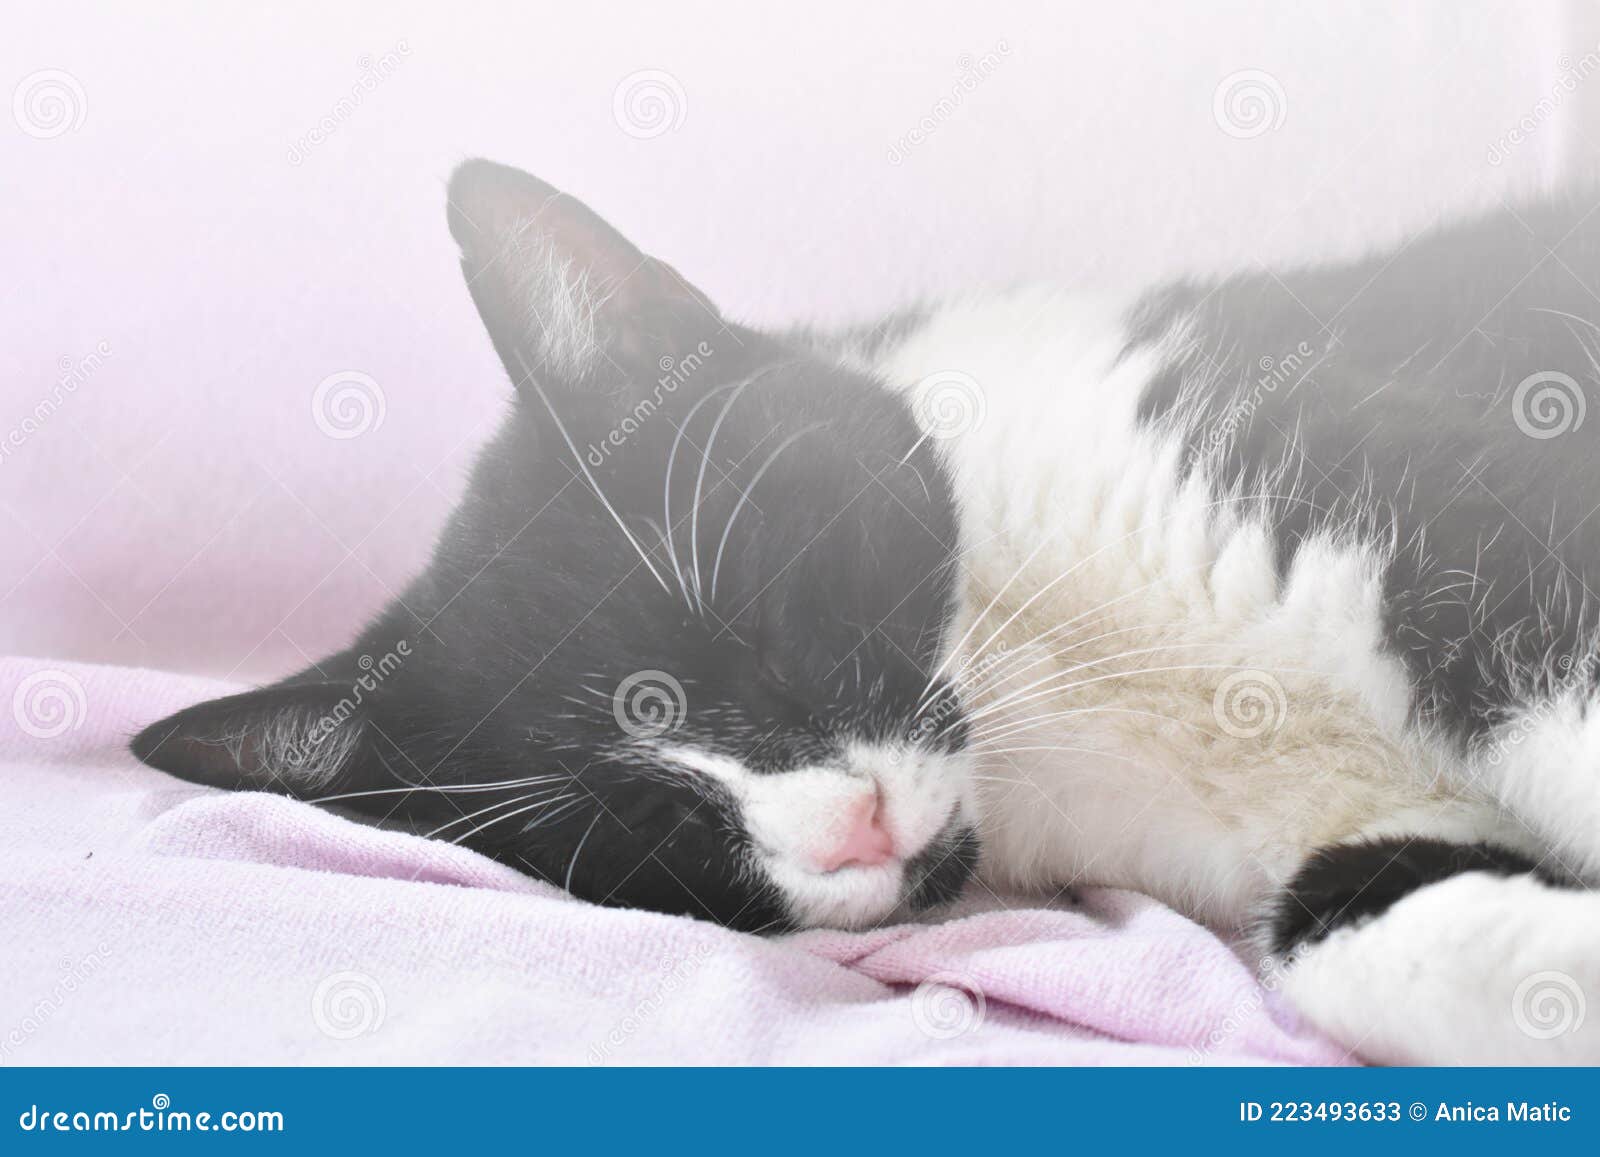 the little cat sleeps soundly on a pink terry blanket.